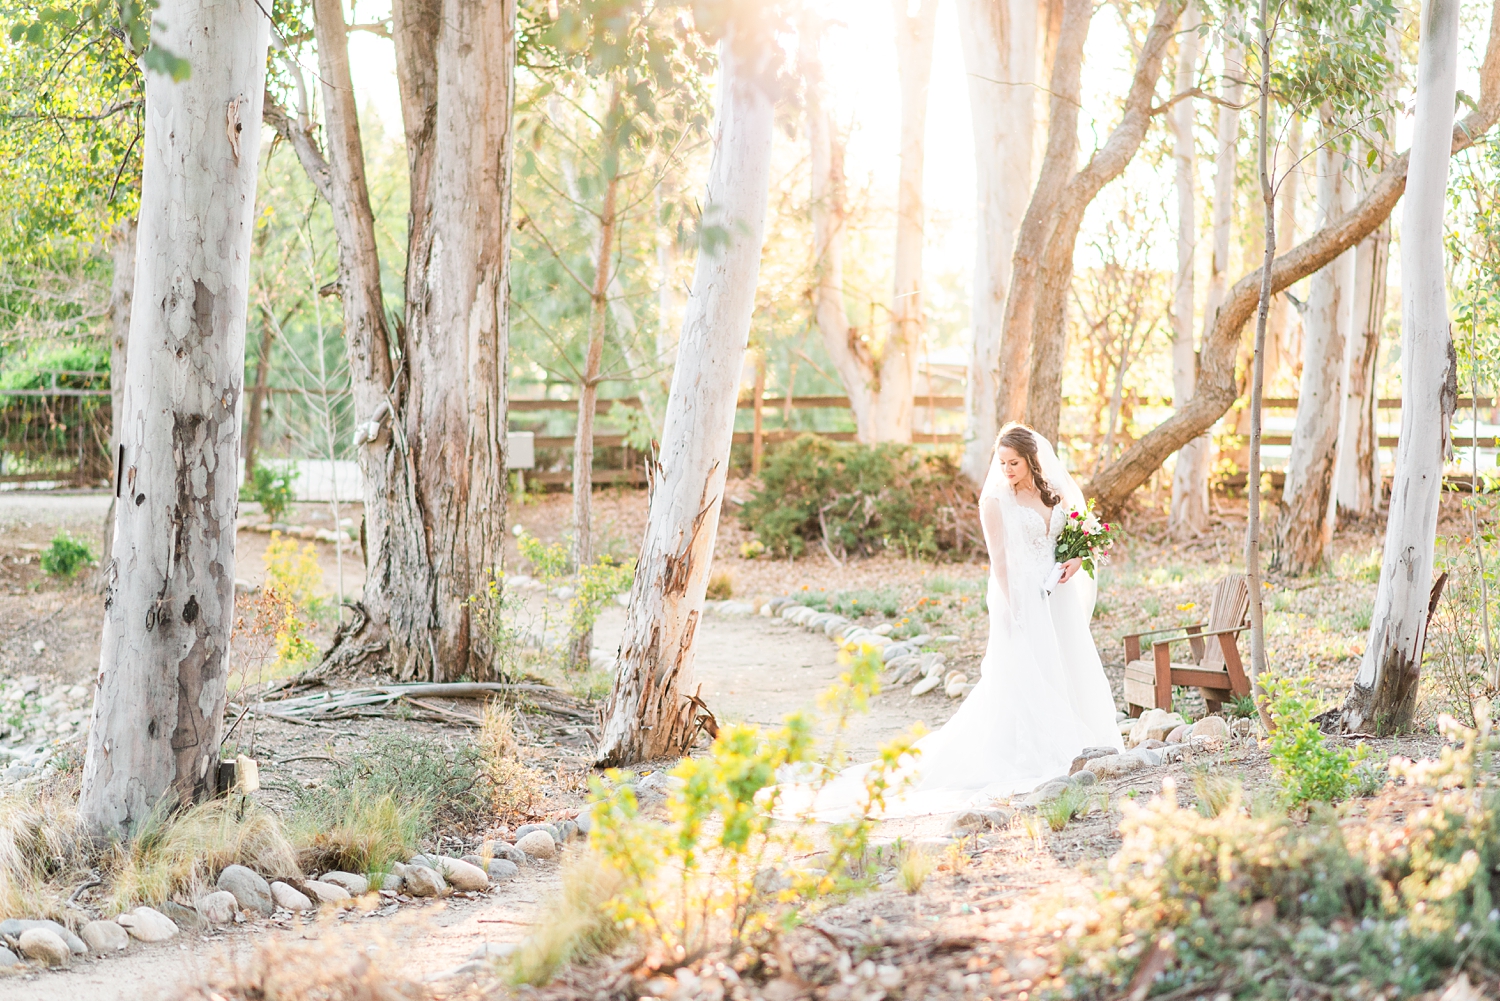 Bridal Session in a winery in temecula from a Temecula Wedding Photographer_0013.jpg